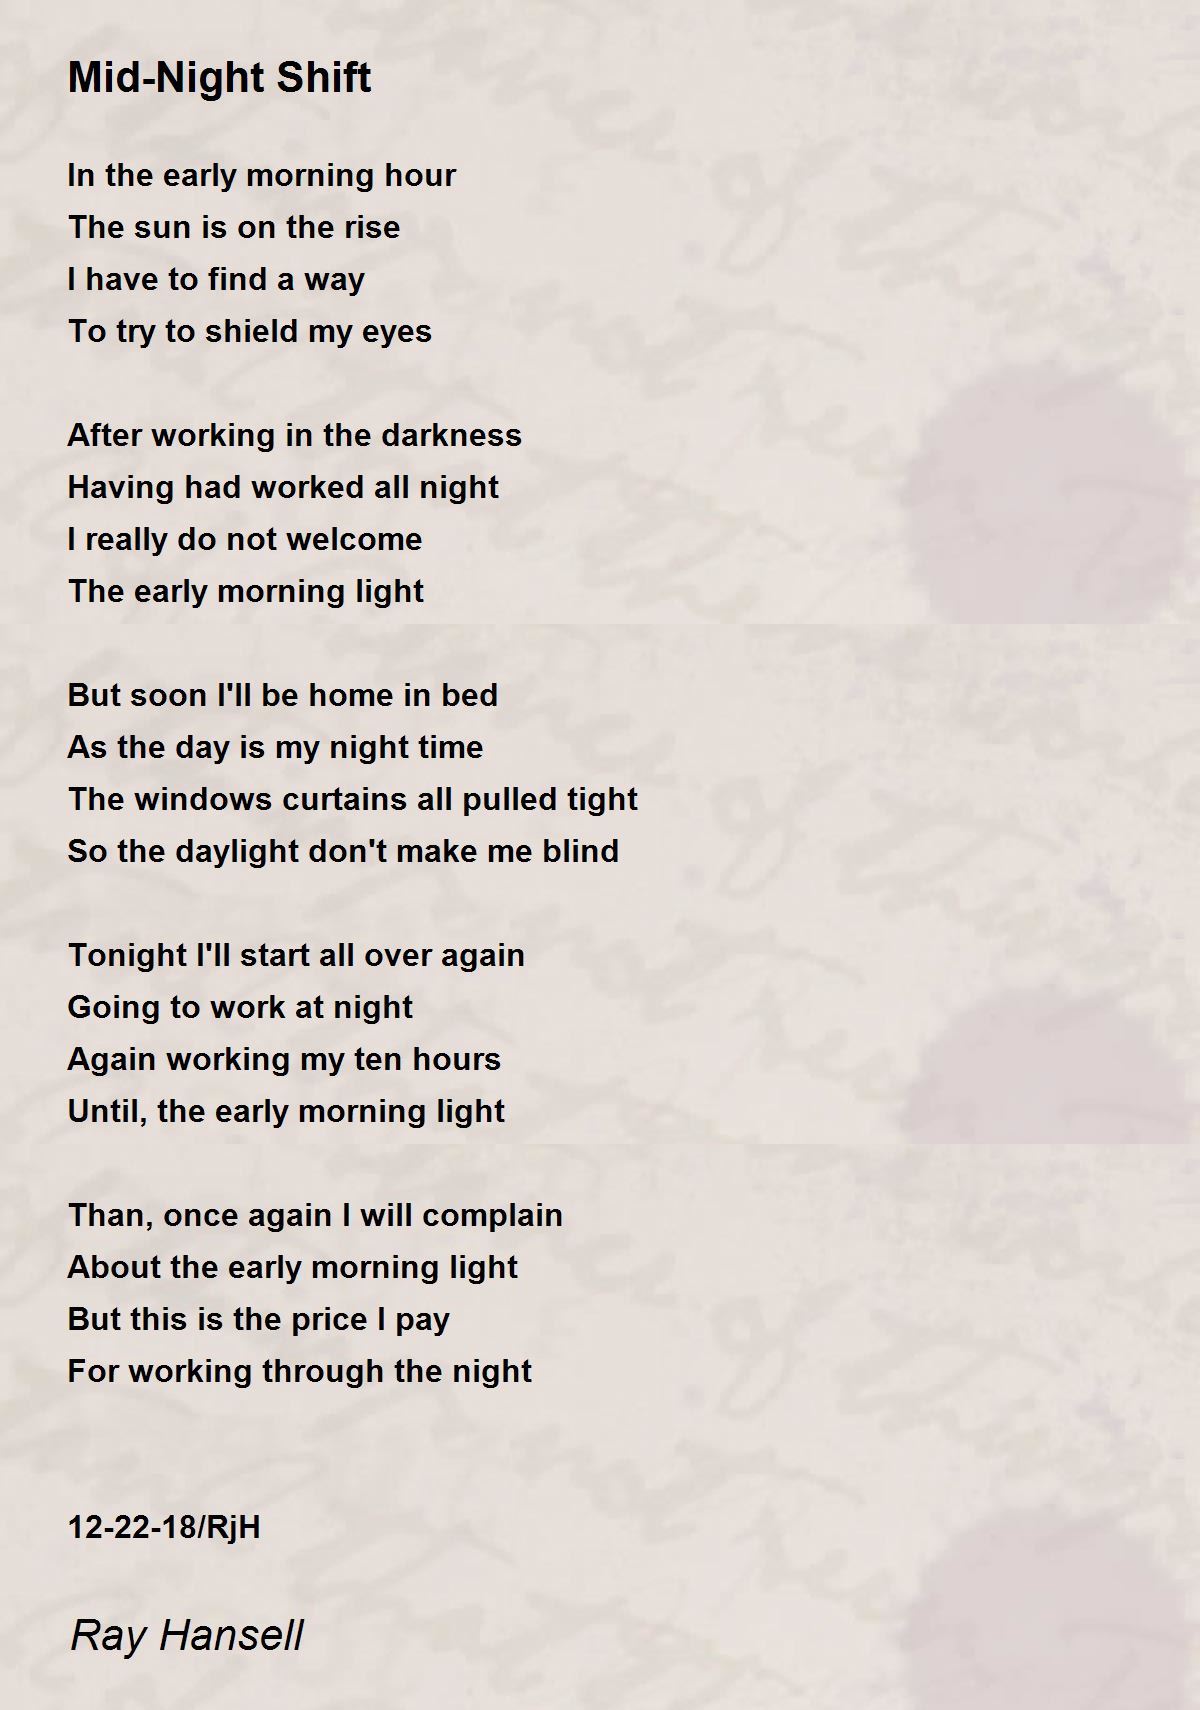 poe #poetry #author #write #writing #fyp #night #shift